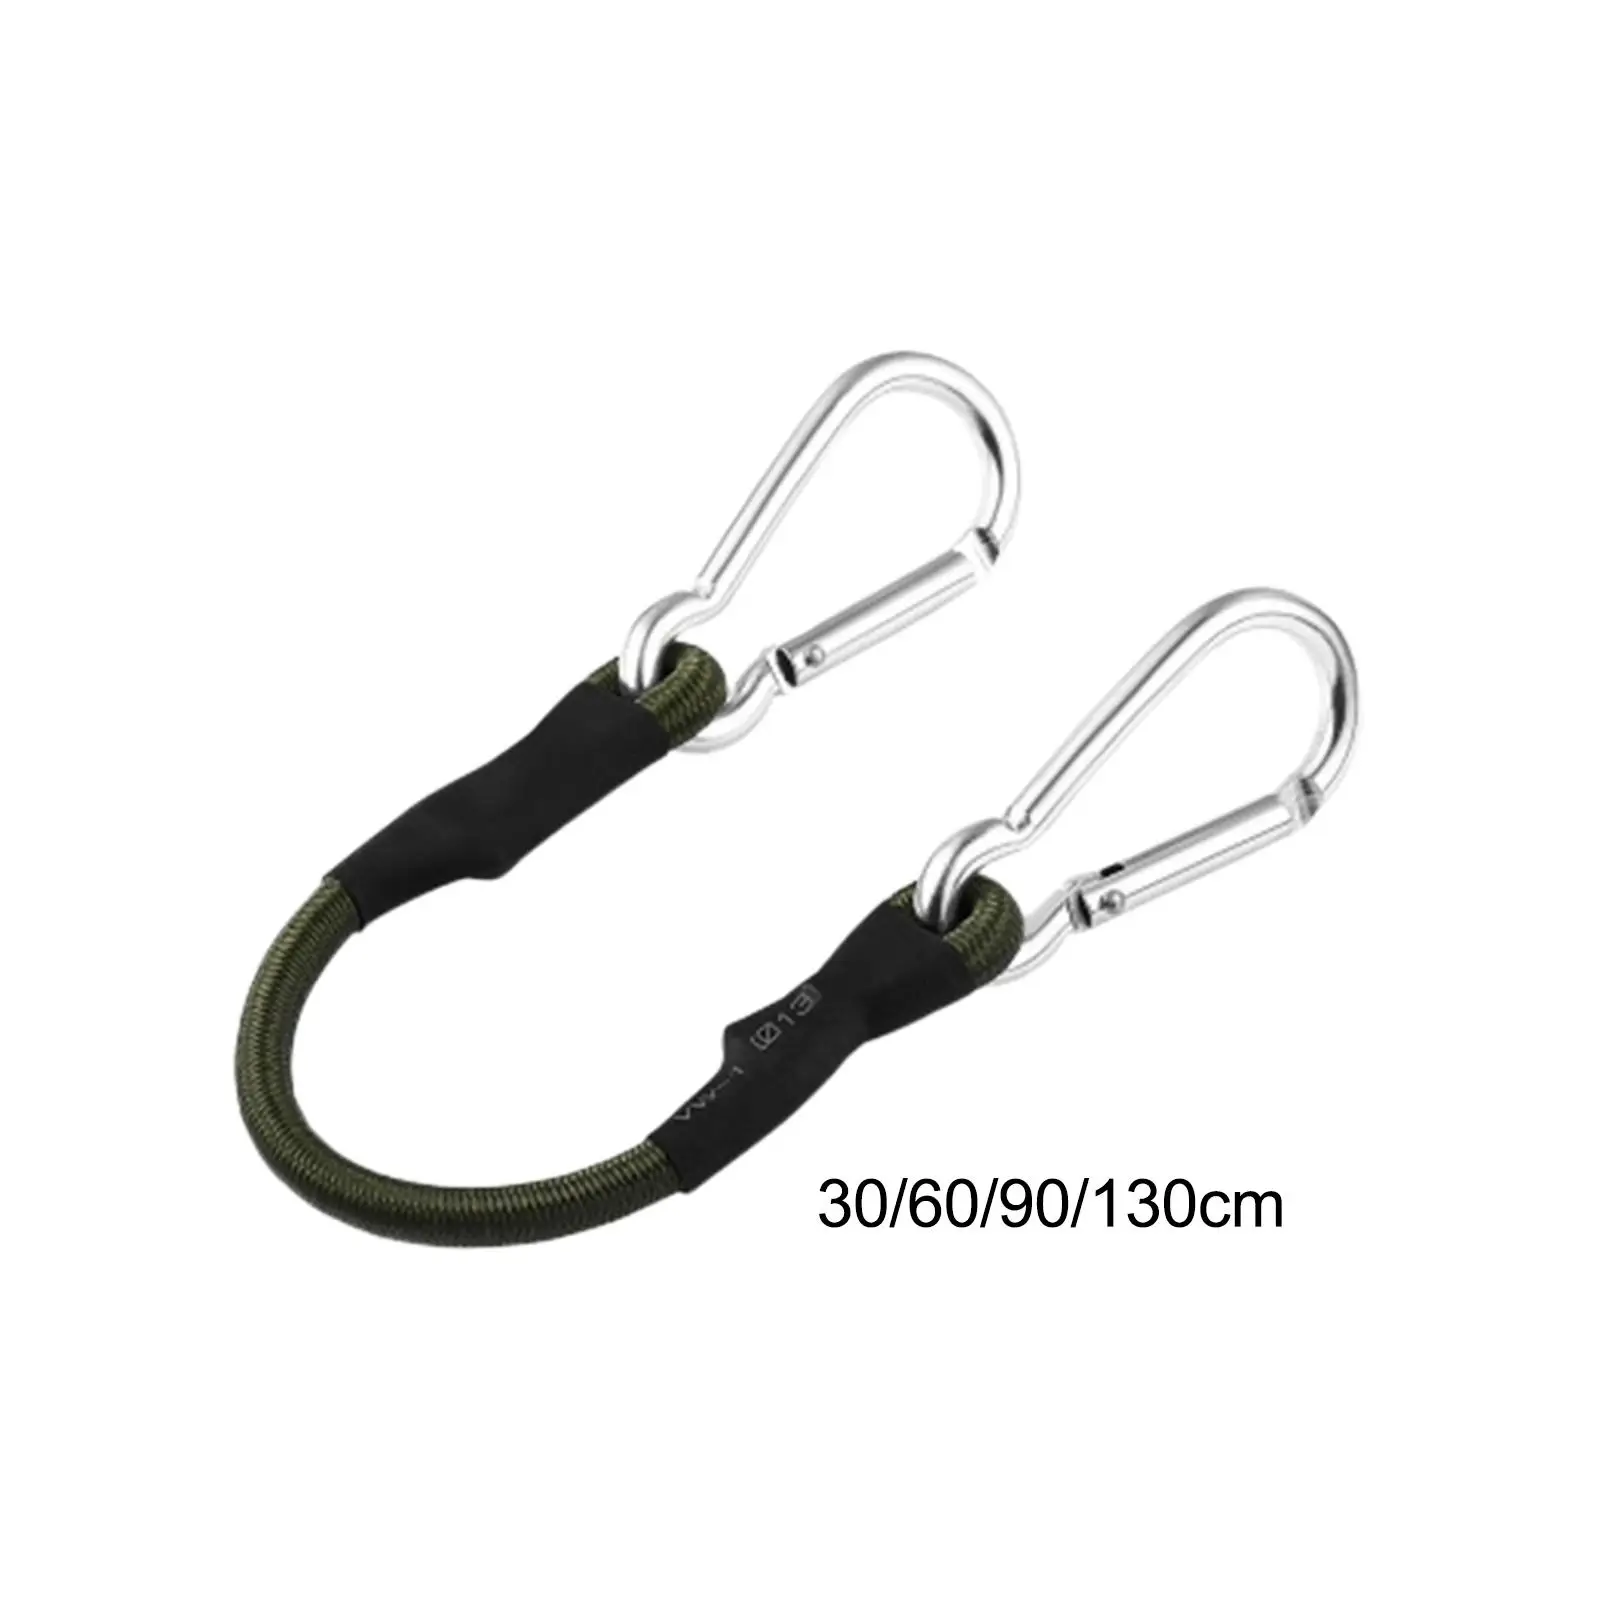 Bungee Cords with Carabiner Strong Cable for Motorcycle Caravans Outdoor Tent